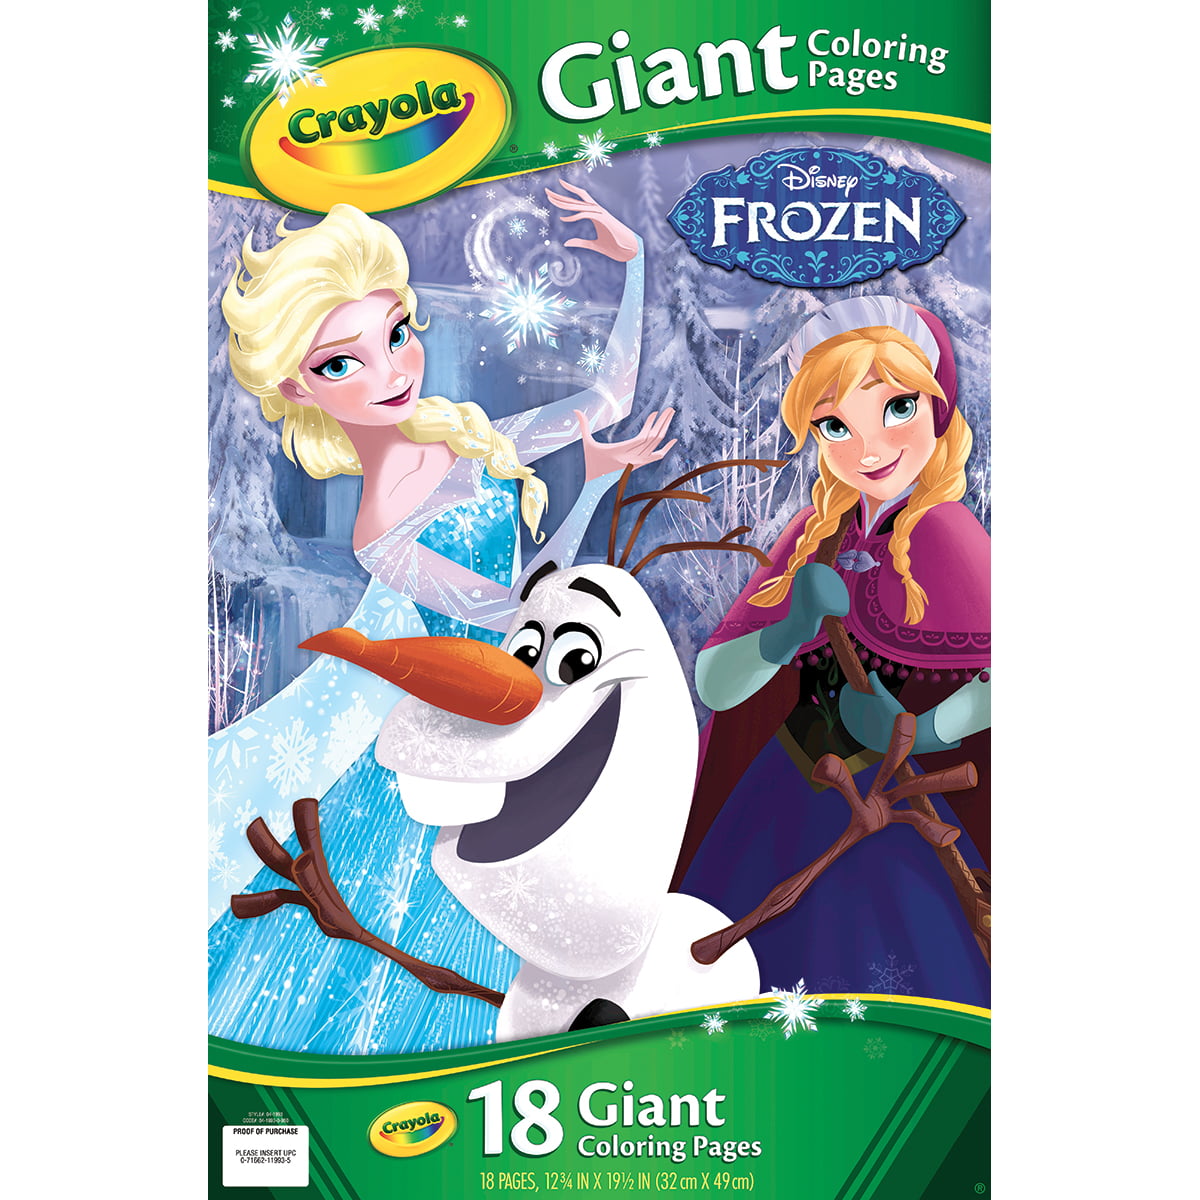 Crayola Giant Coloring Pages Featuring Disney'S Frozen, 18 ...